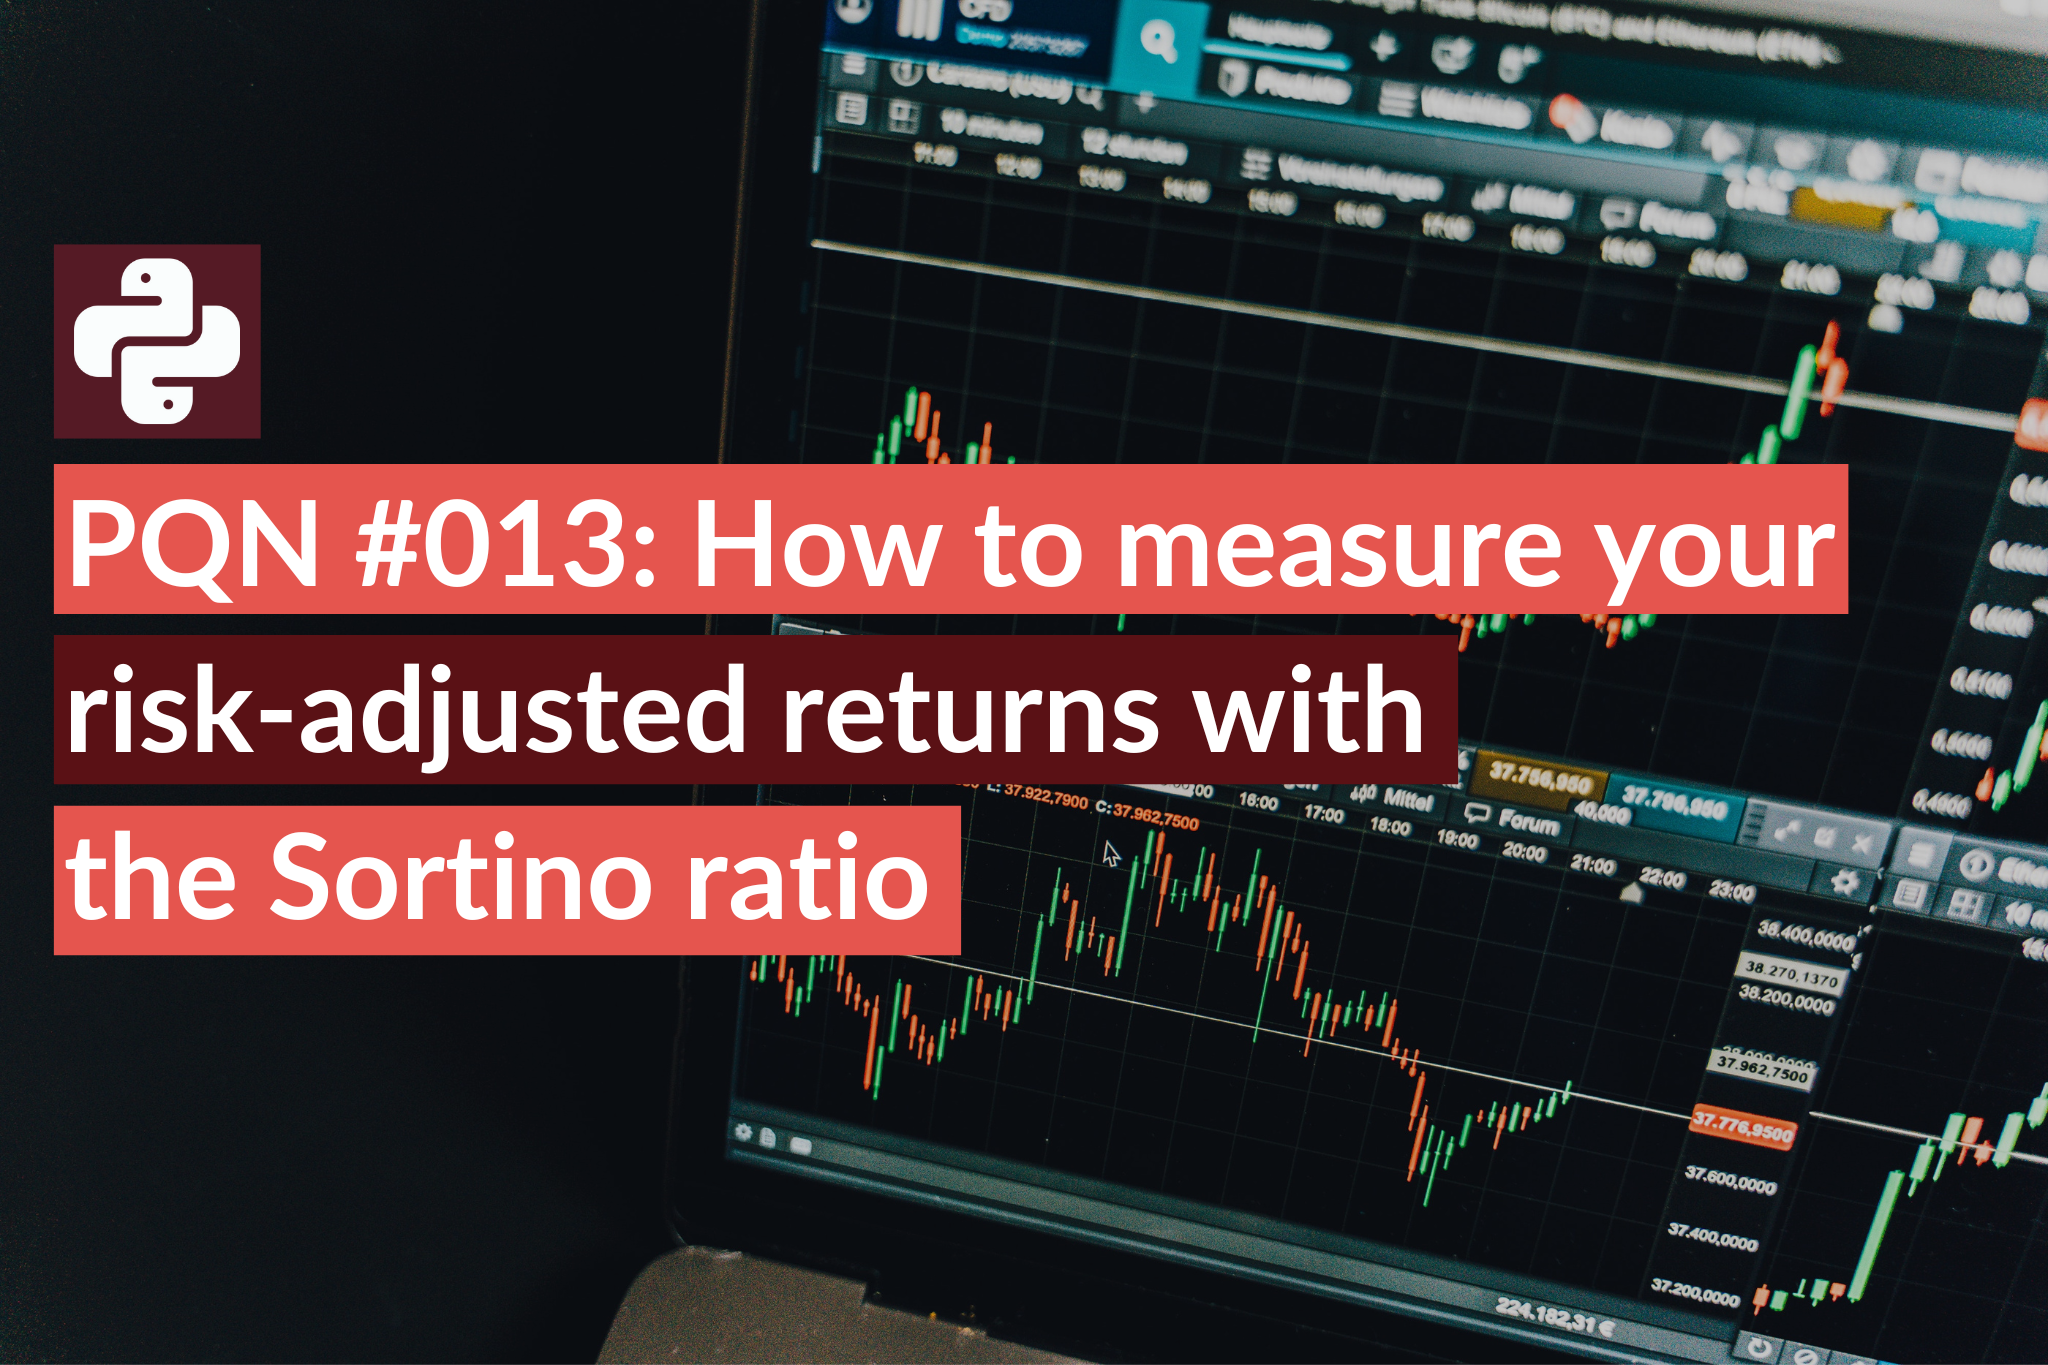 PQN #013 How to measure your risk-adjusted returns with the Sortino ratio